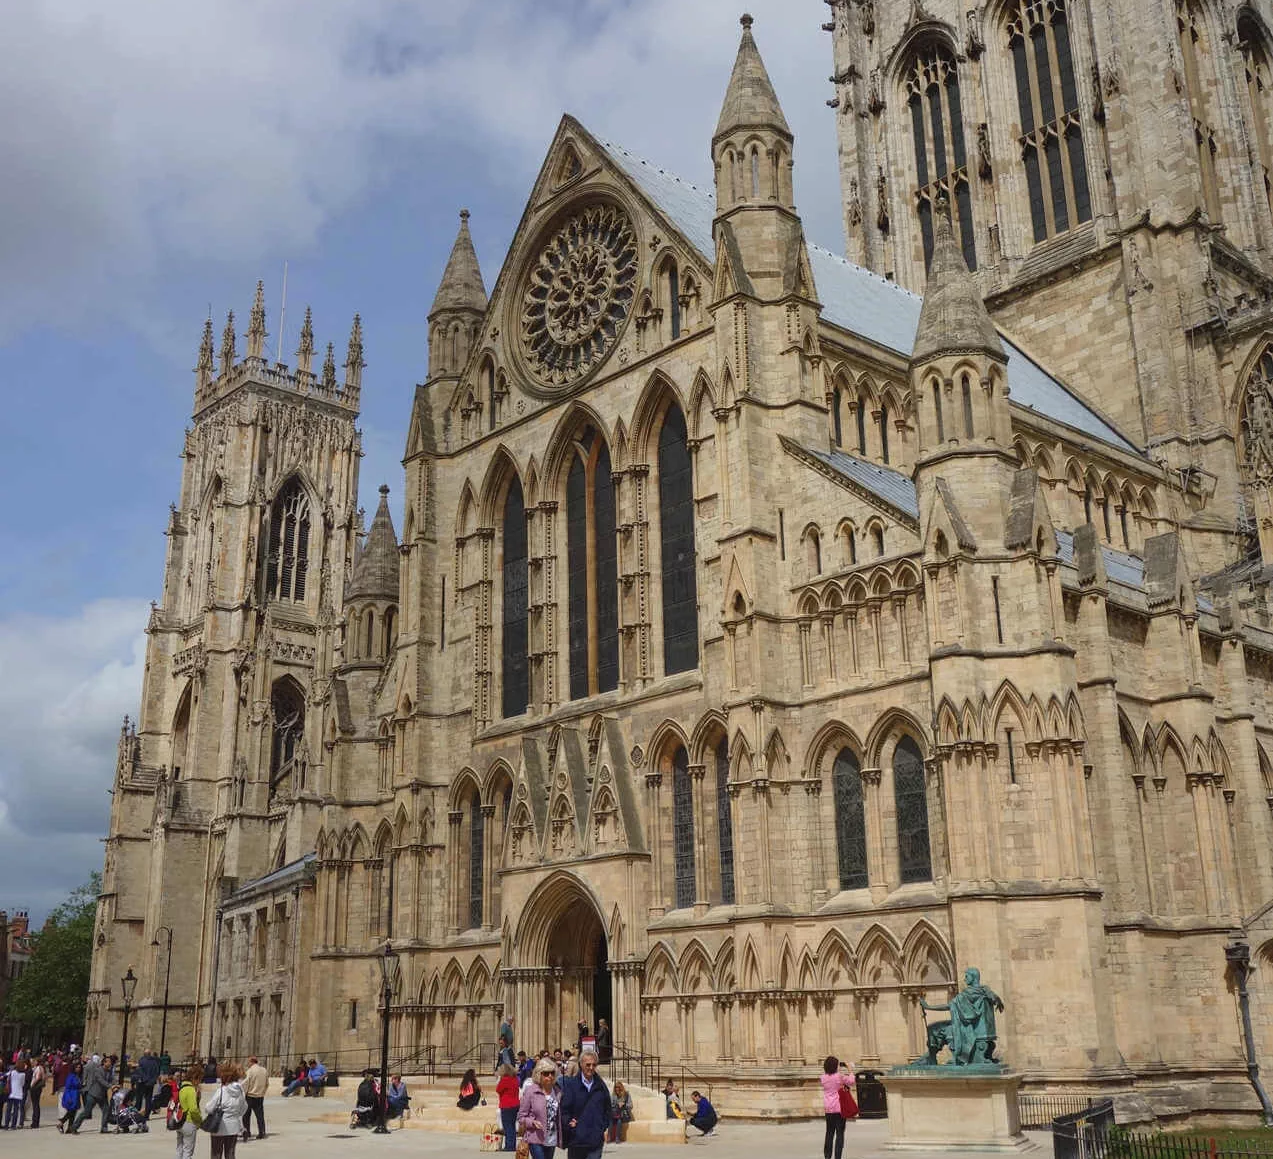 The York Minster is the largest Gothic church north of the Alps, and has more original medieval glass than the rest of England's churches combined